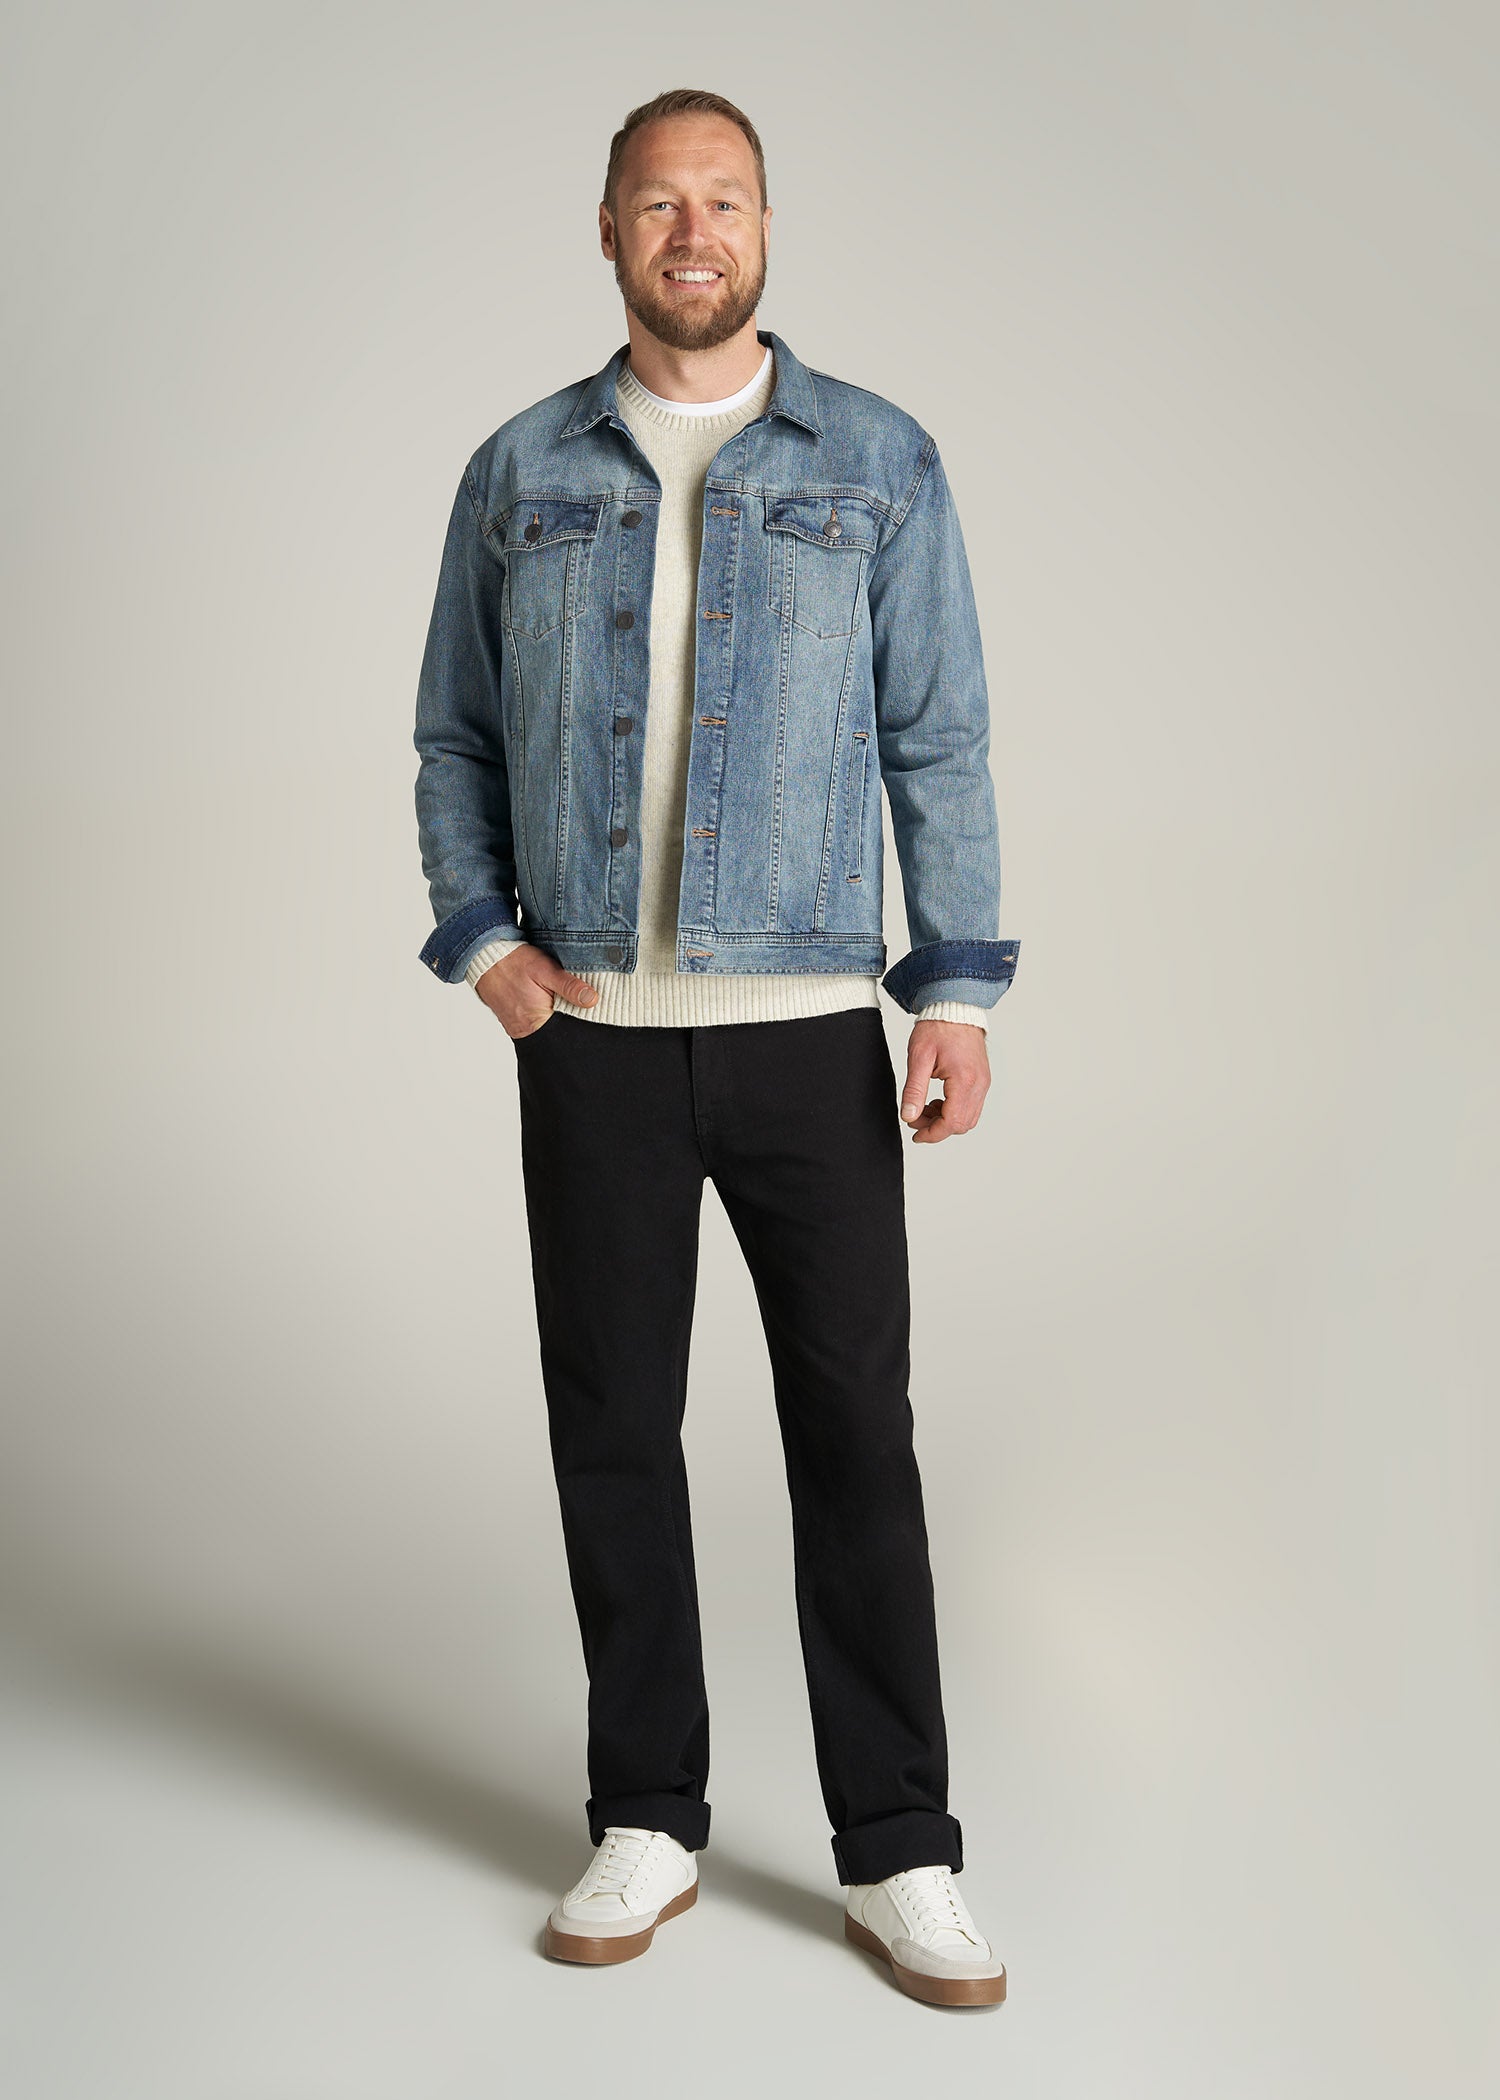 How to Wear Denim on Denim Outfits - #AEJeans